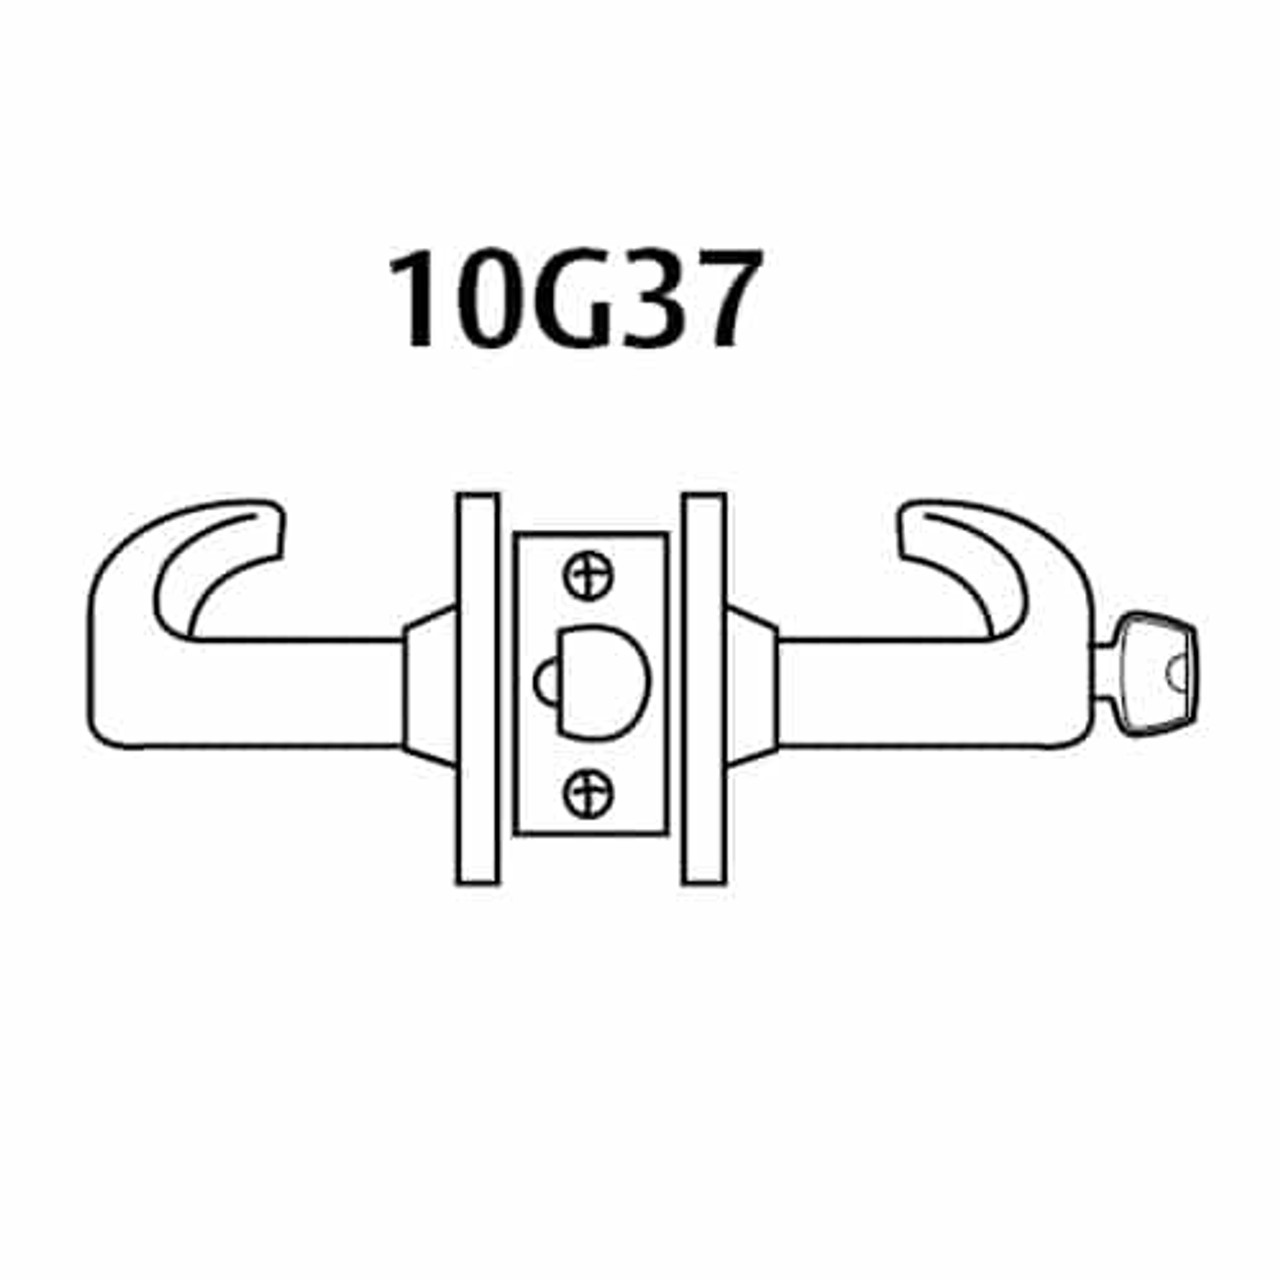 2870-10G37-GB-10 Sargent 10 Line Cylindrical Classroom Locks with B Lever Design and G Rose Prepped for SFIC in Dull Bronze